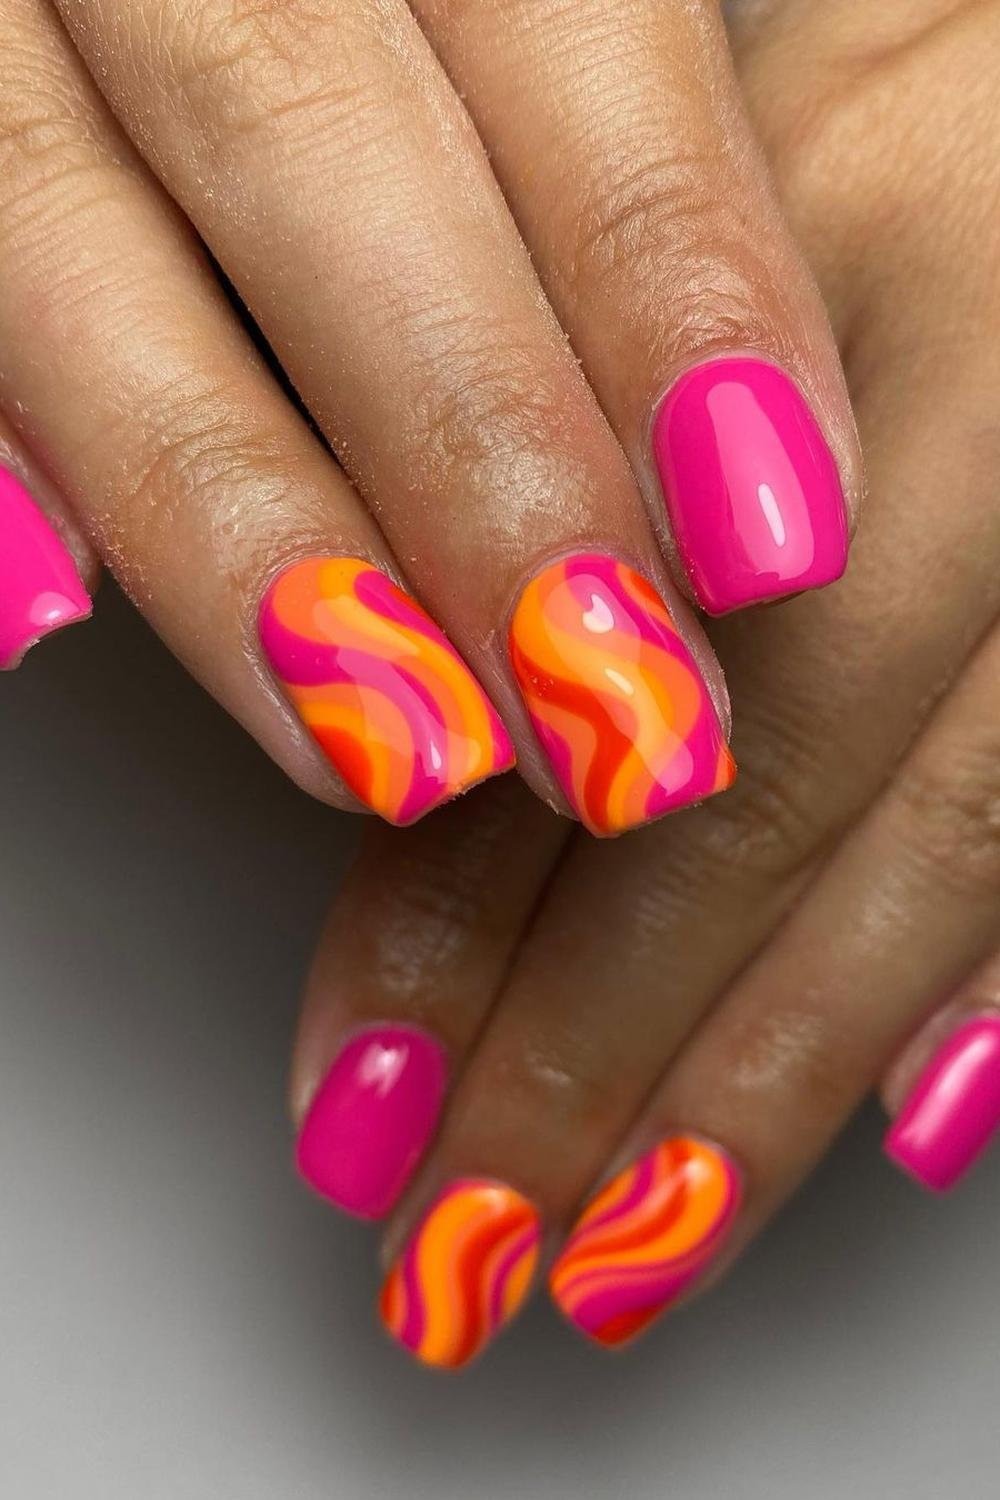 25 - Picture of Pink and Orange Nails